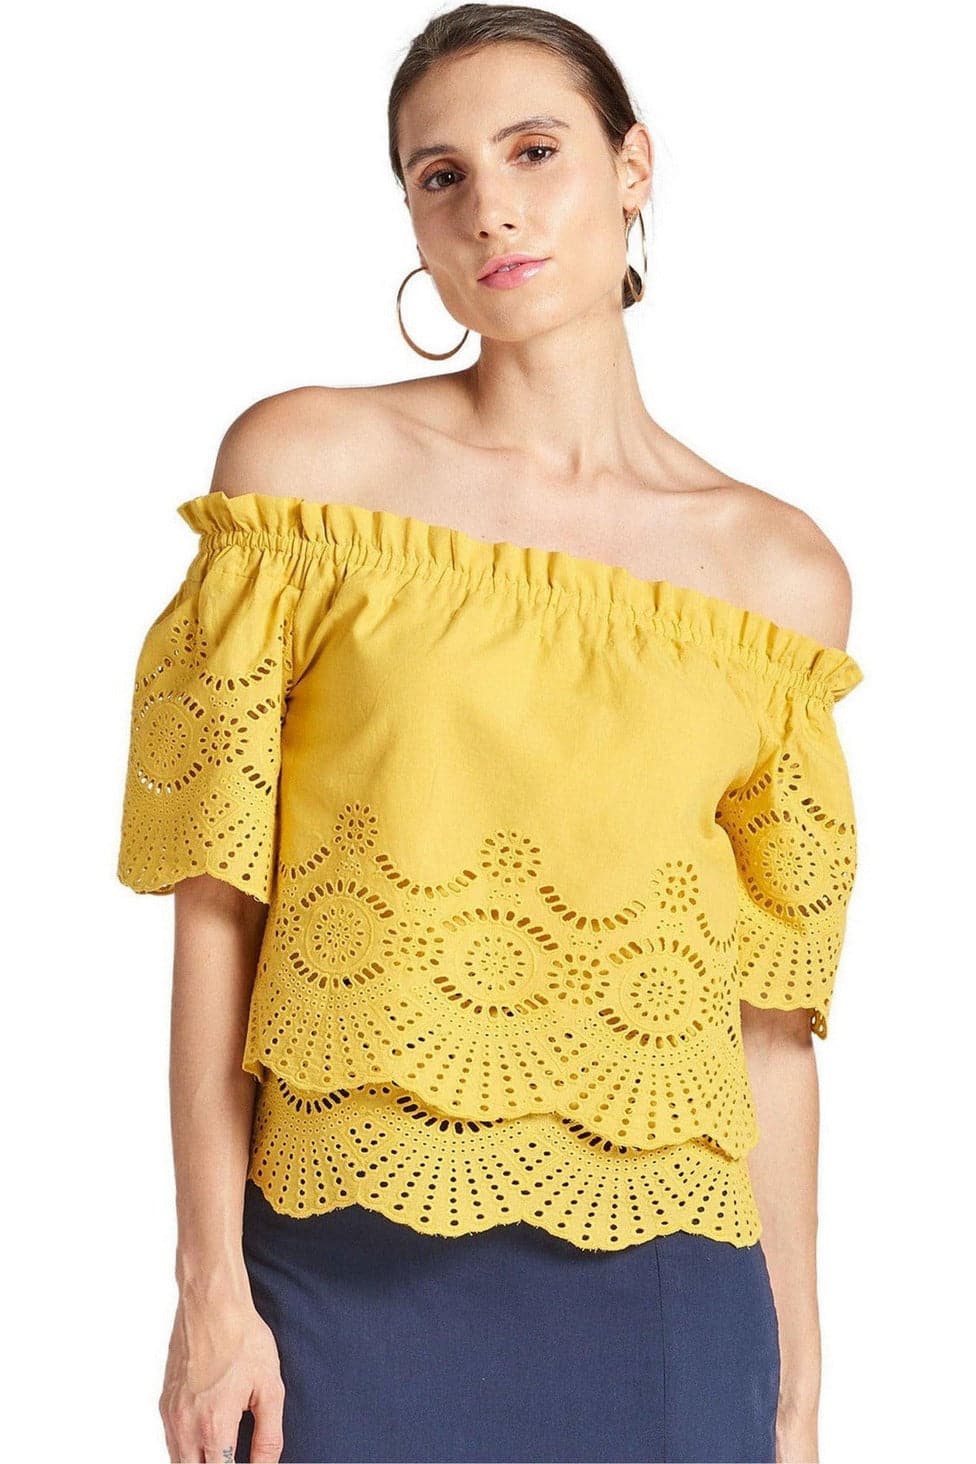 Daisy Top - Off The Shoulder Cotton Eyelet Top - SwagglyLife Home & Fashion